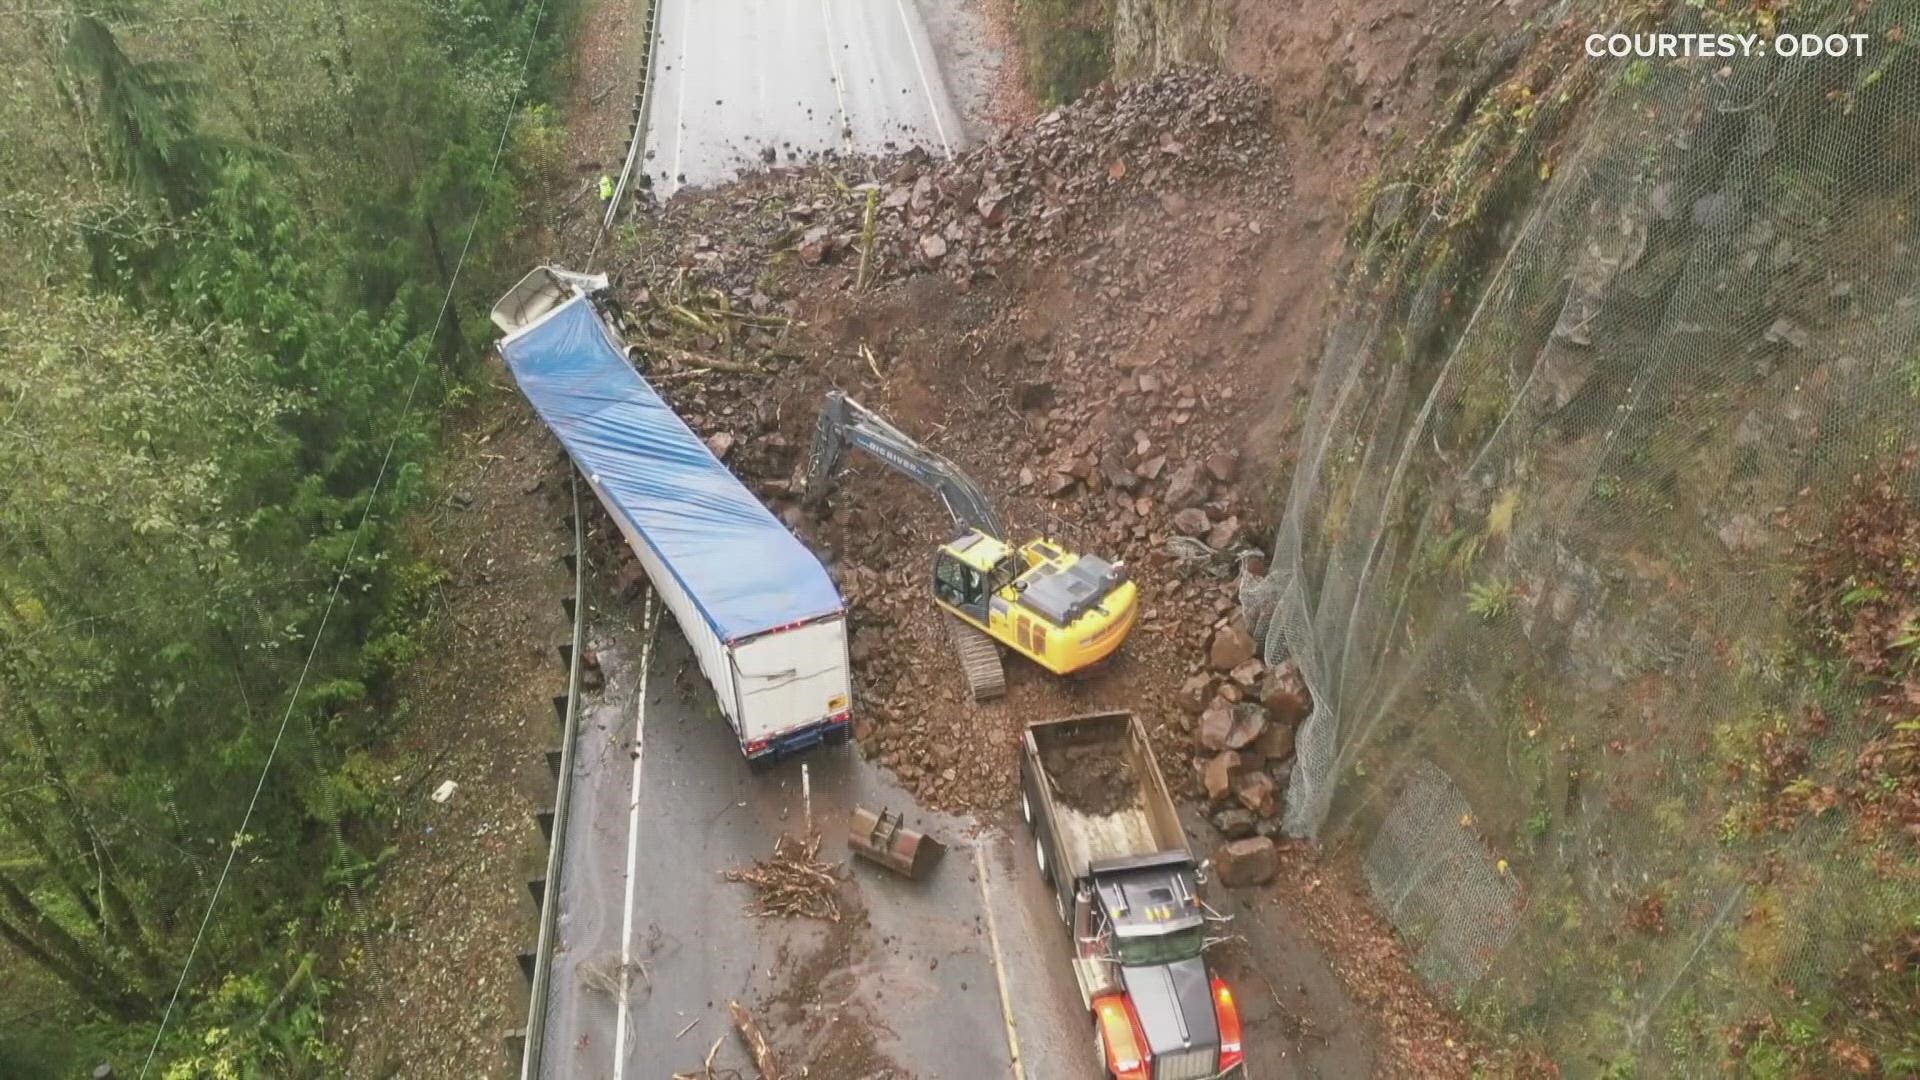 Drone video shows a landslide blocking Highway 30 between Astoria and Clatskanie. ODOT said at least ten truckloads of rock and mud slid onto both lanes of traffic.